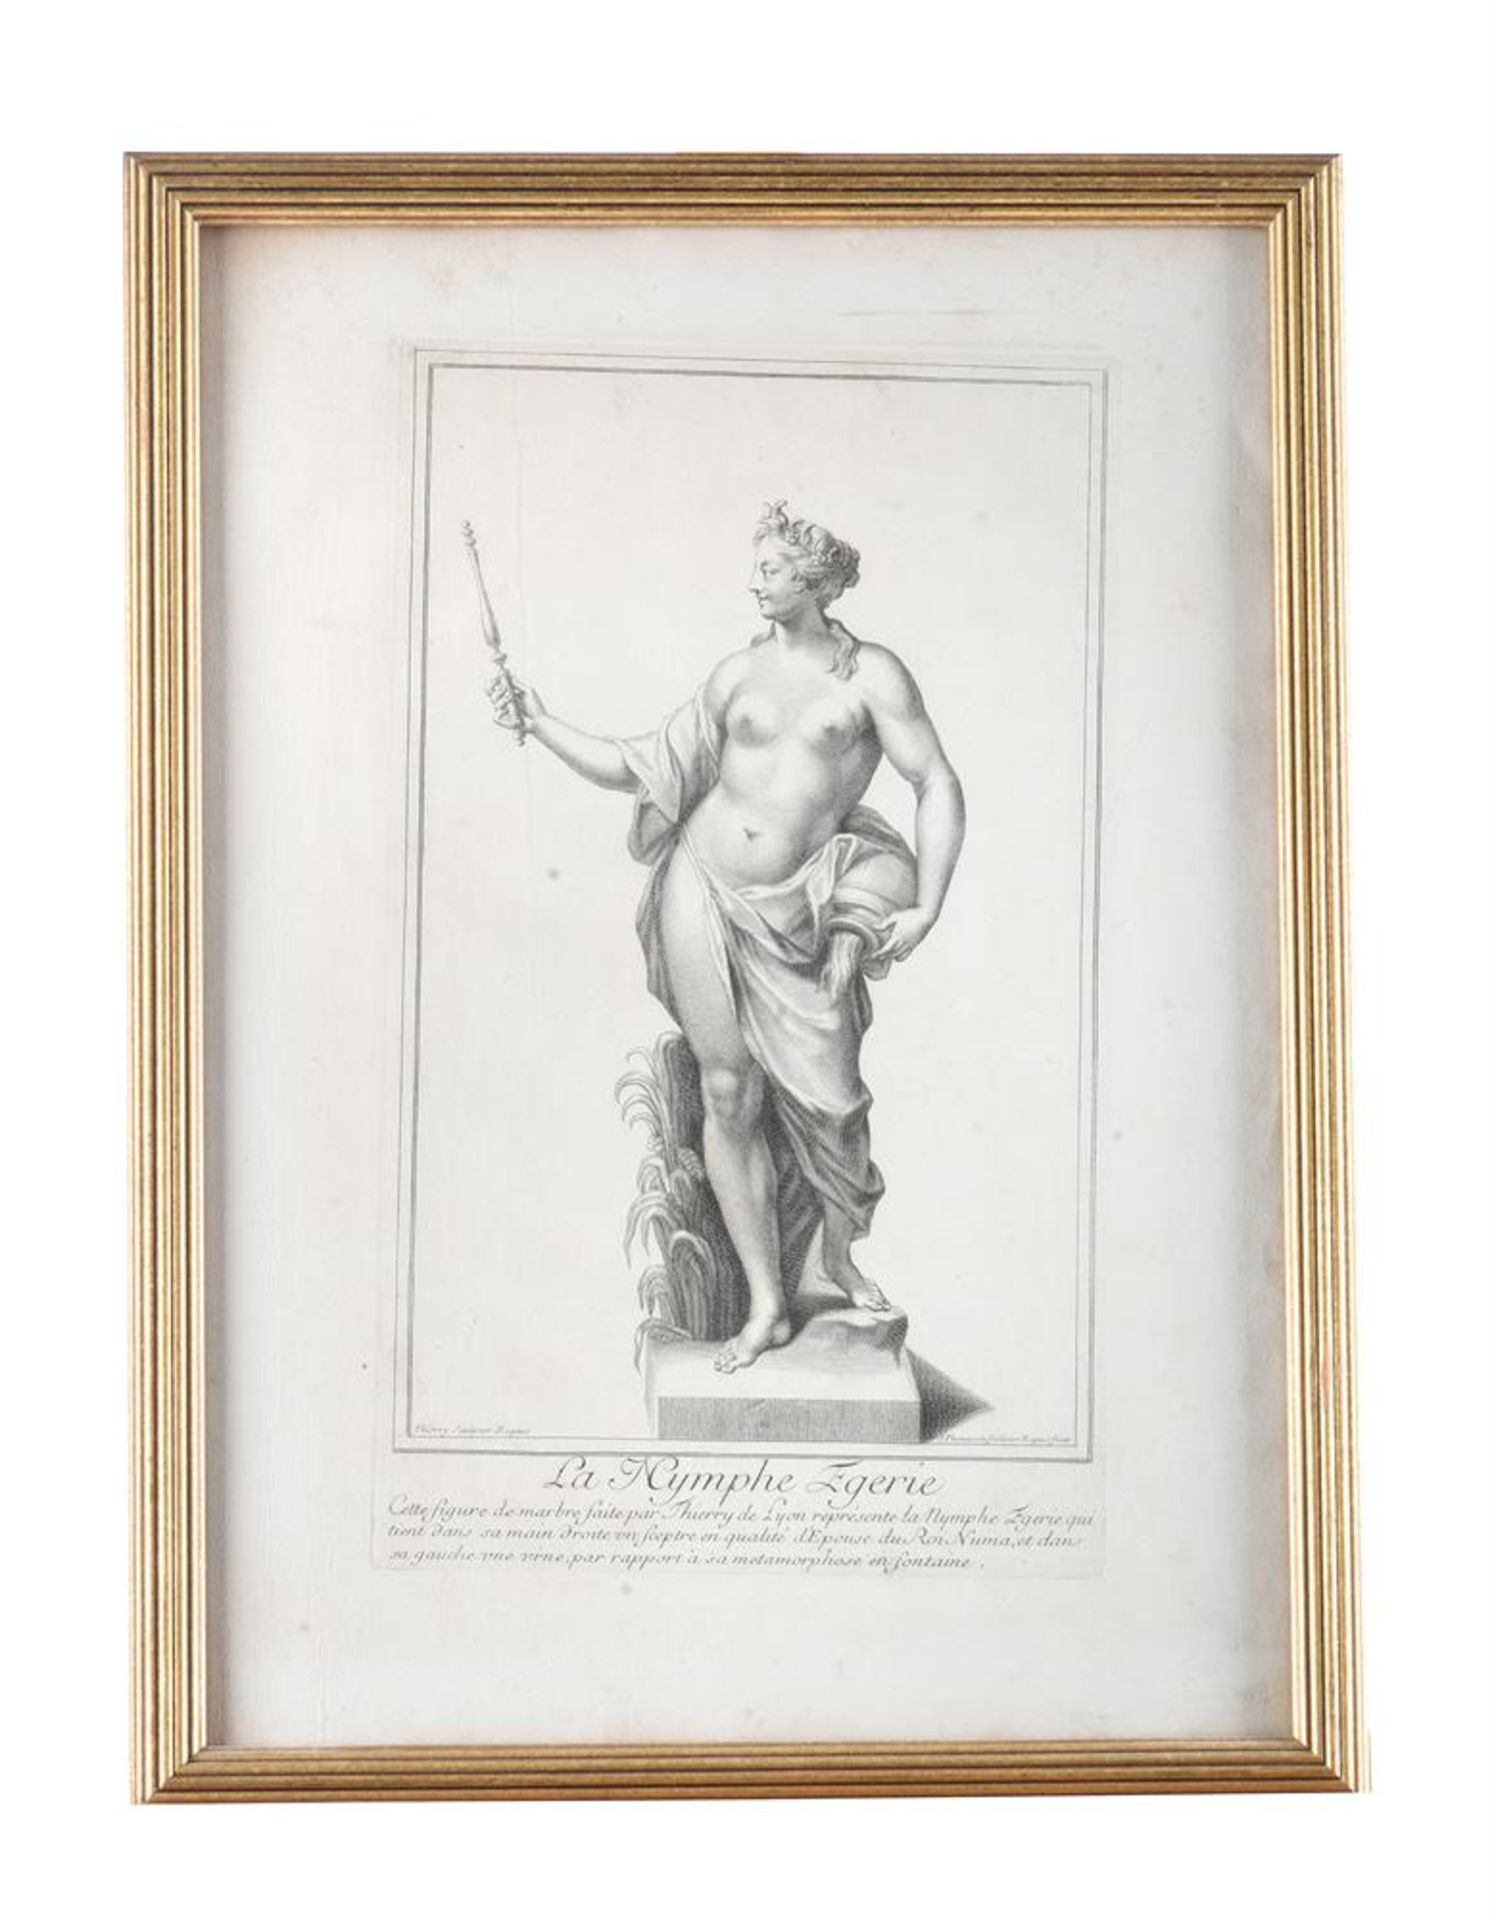 A SET OF TEN 17-18TH CENTURY ENGRAVINGS OF CLASSICAL AND RENAISSANCE STATUARY - Image 4 of 11